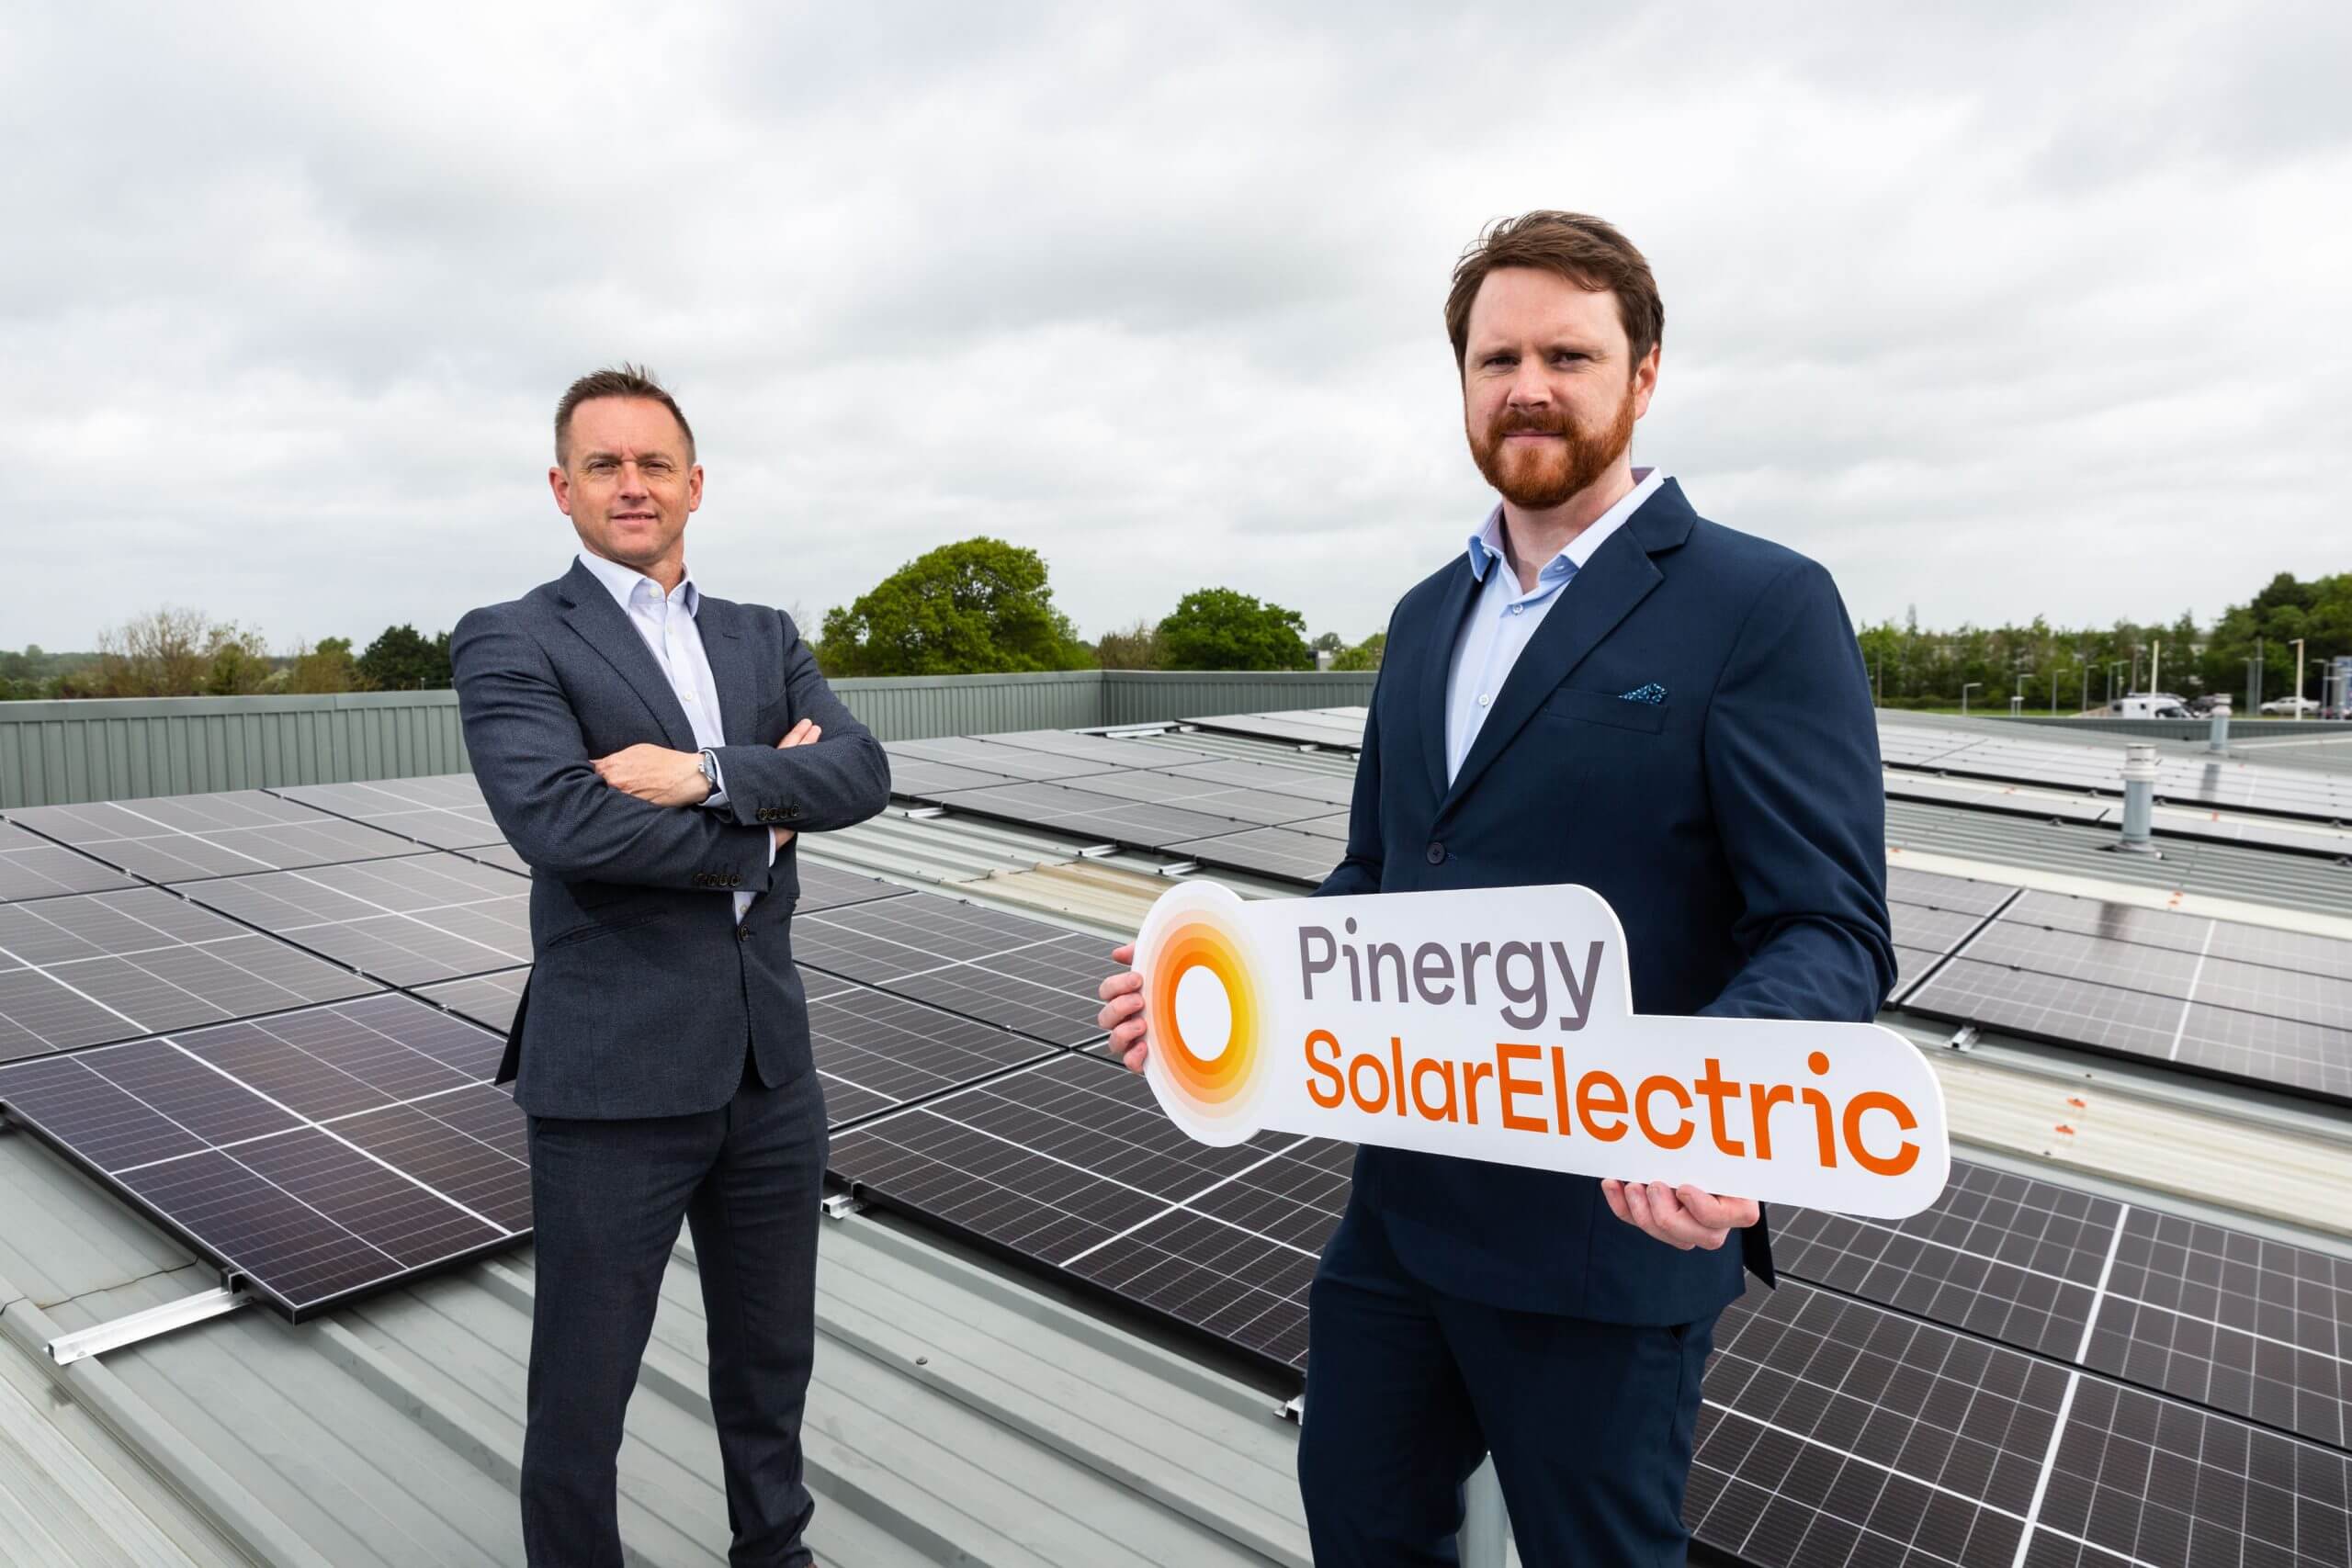 New Pinergy SolarElectric installation one of the first with approved export connection to the grid